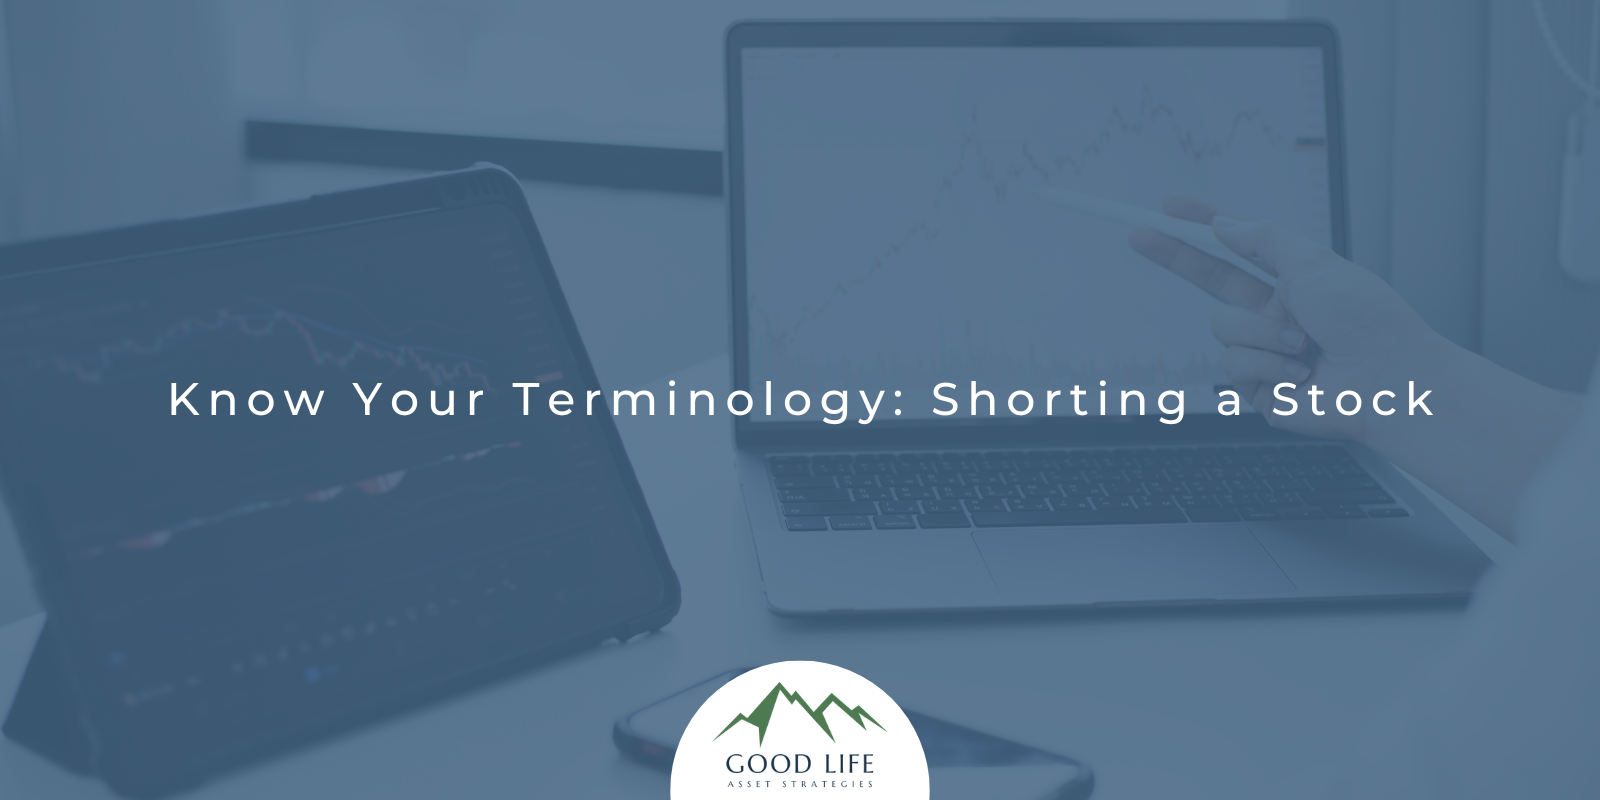 Know Your Terminology: Shorting a Stock